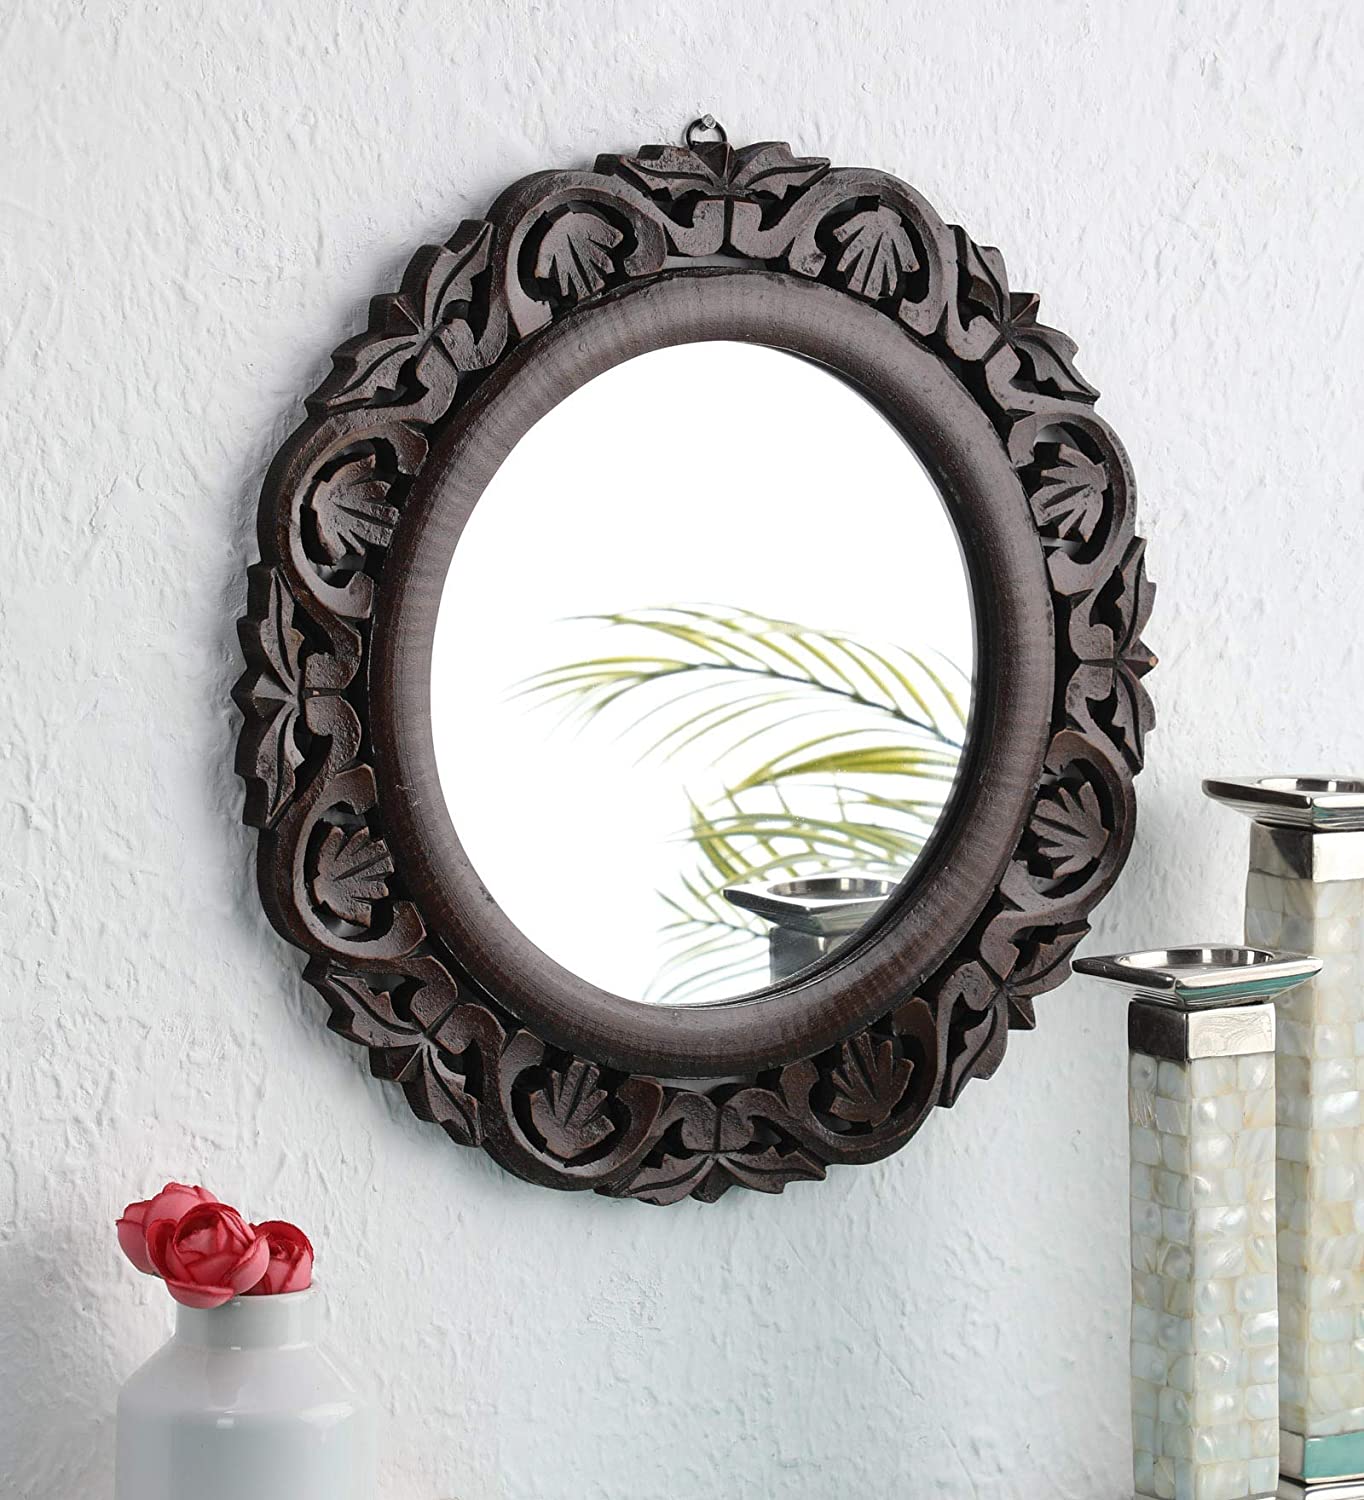 Hand Crafted Wooden Round Shape Vanity Wall Mount Mirror- Brown, 16 X 16 Inches, Framed